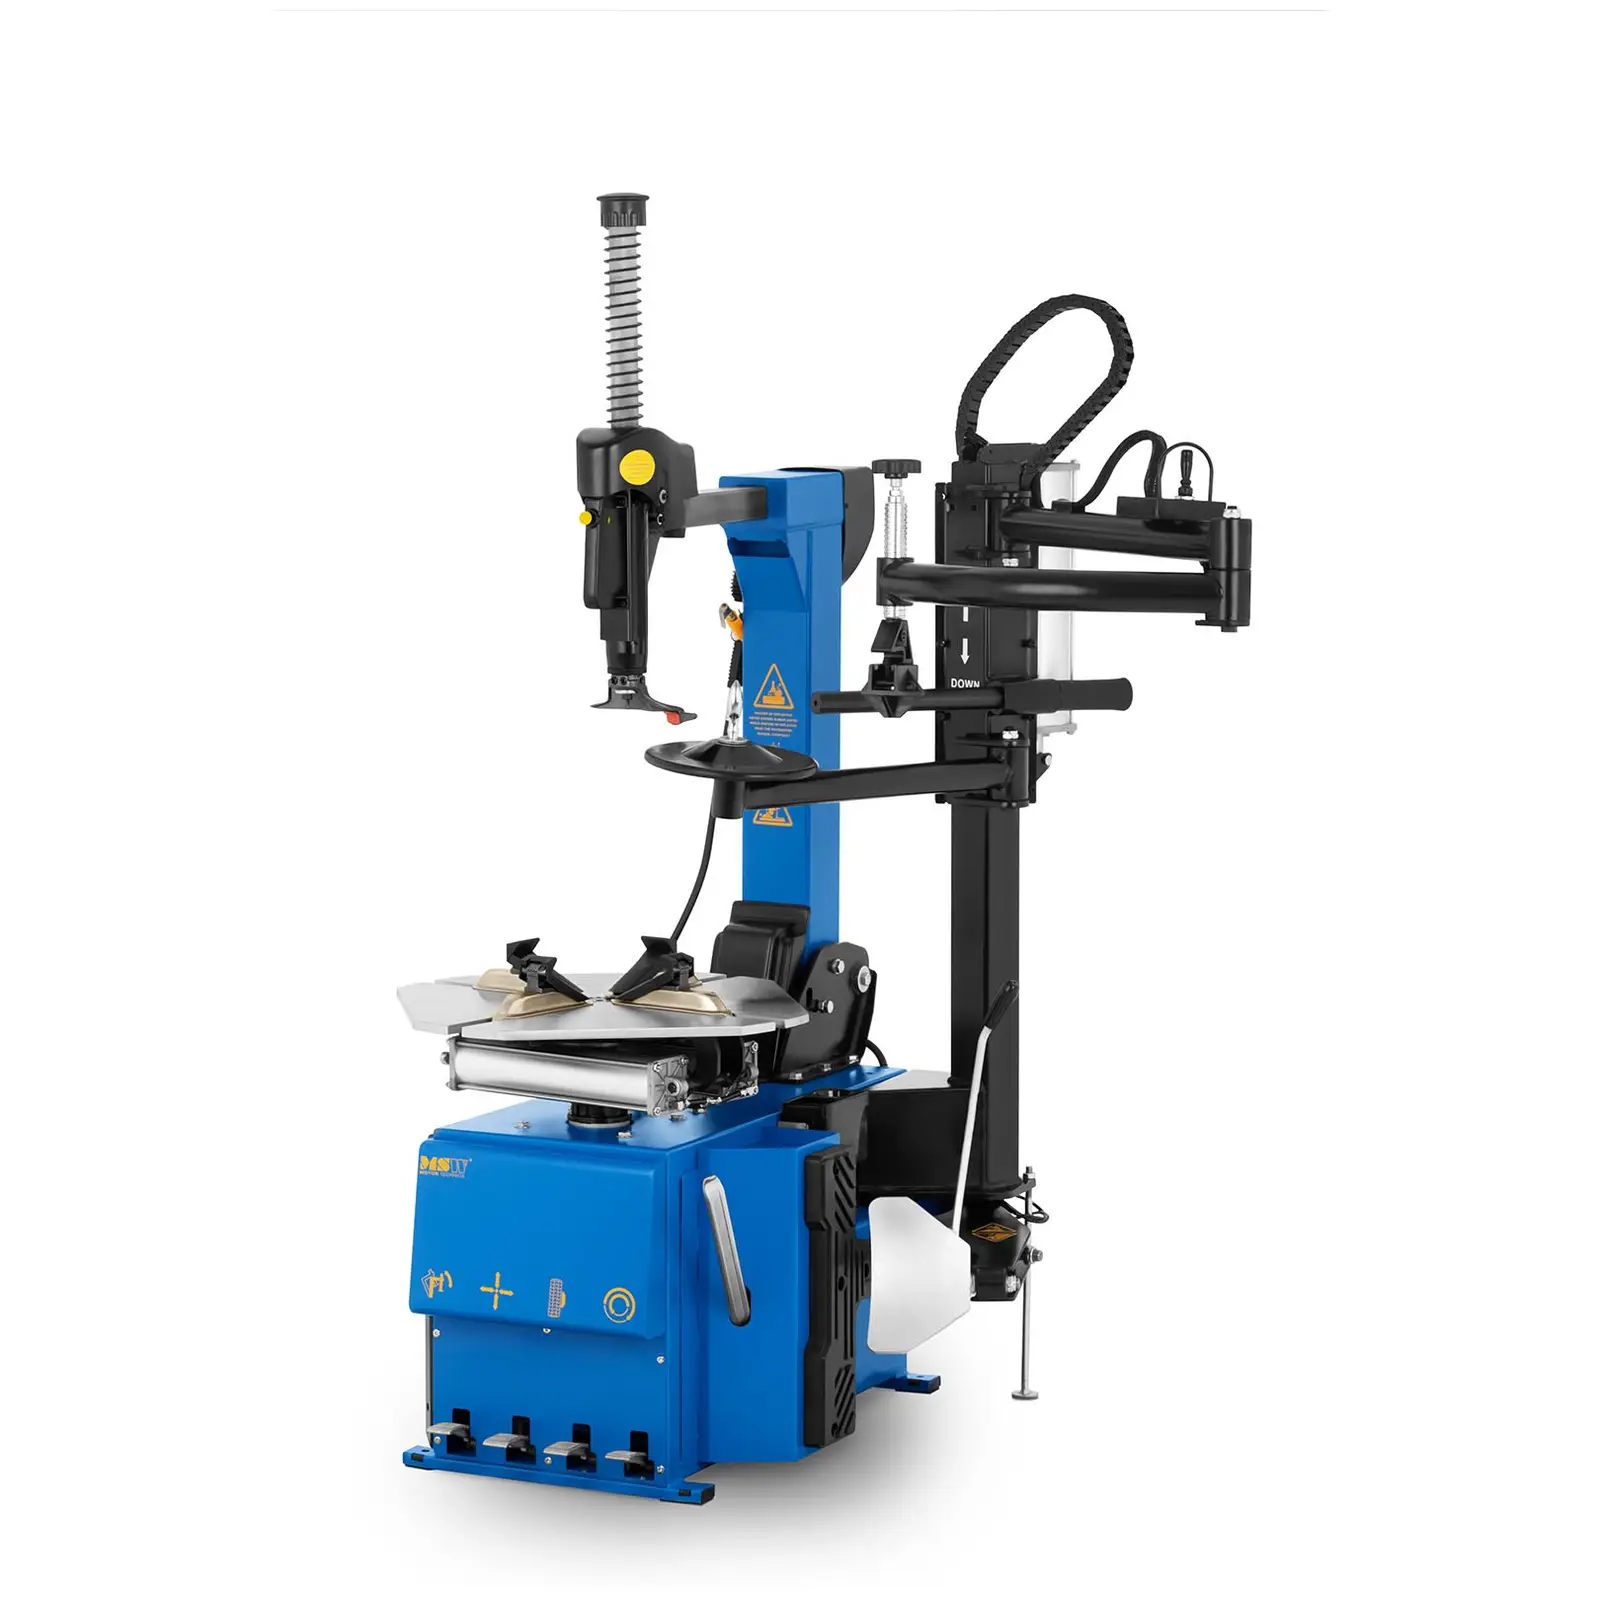 Tyre Changer Machine - 1,100 W - Assist arms - 12 to 24"